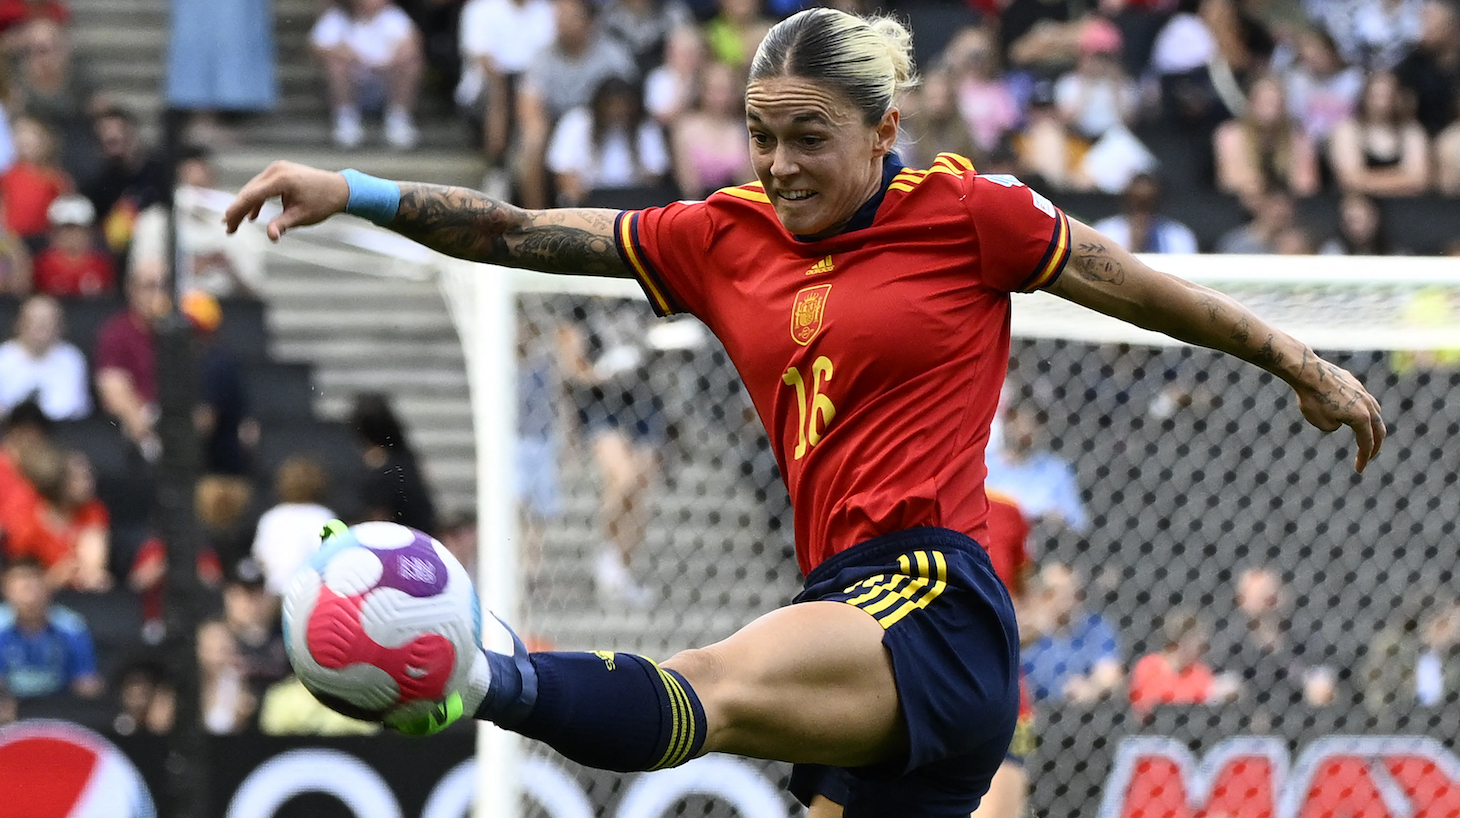 Spain's defender Maria Leon clears the ball during the UEFA Women's Euro 2022 Group B football match between Spain and Finland at Stadium MK in Milton Keynes, north of London on July 8, 2022.